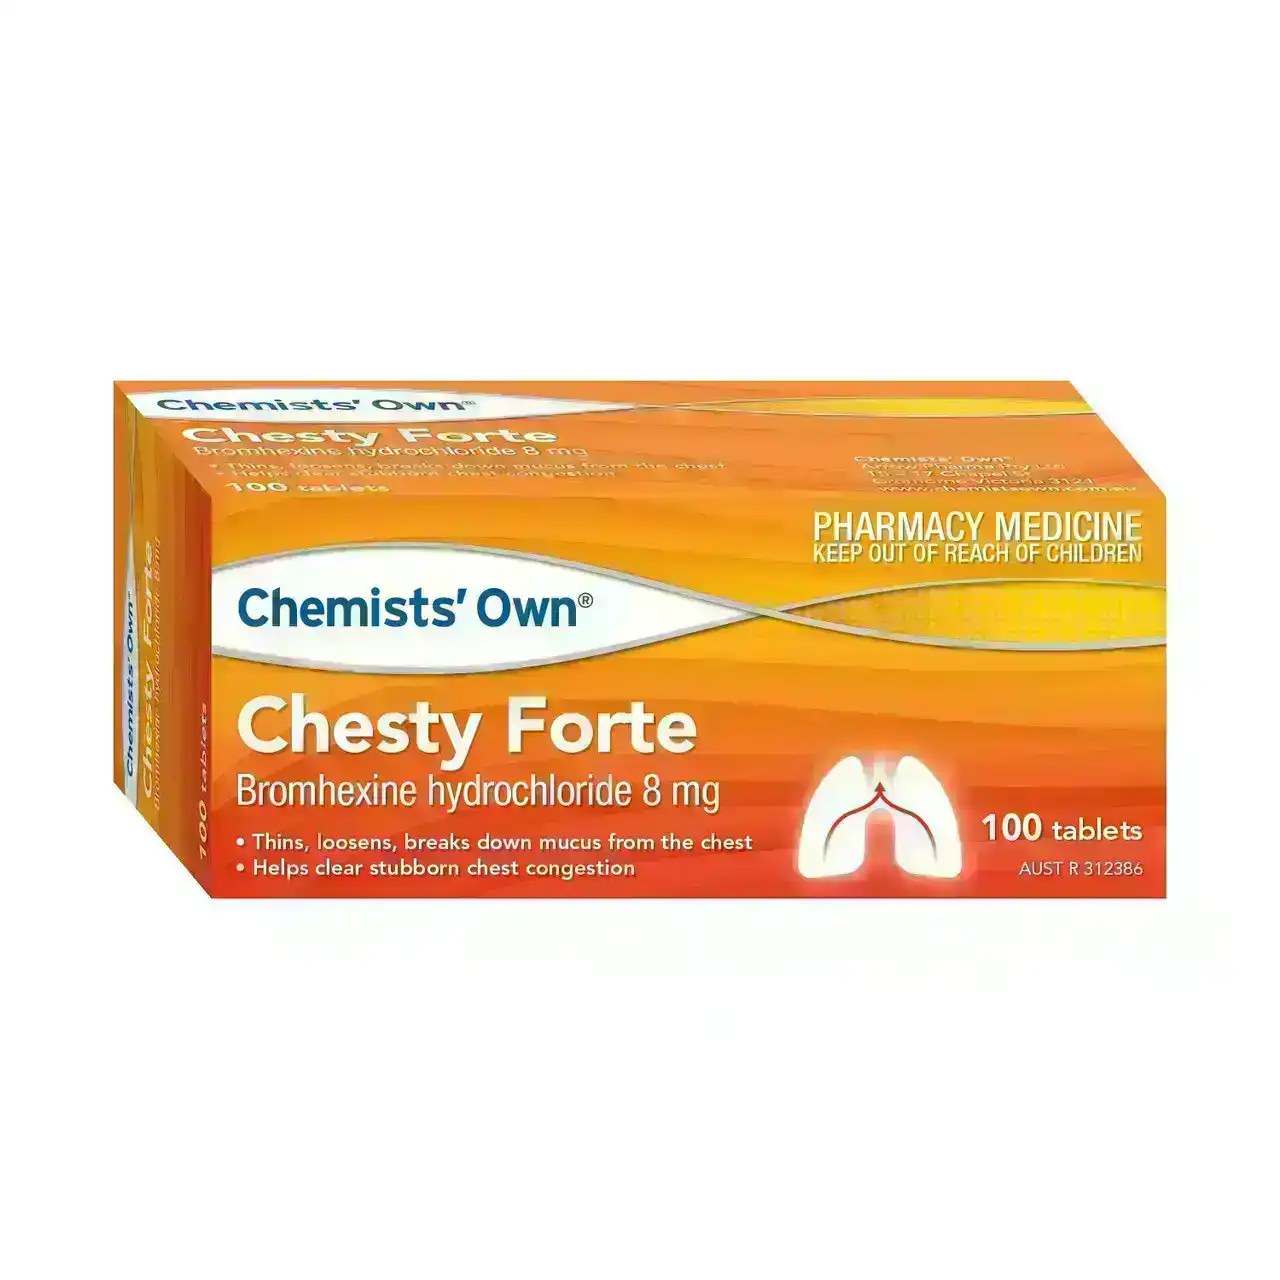 Chemists Own Chesty Forte 8mg 100 Tablets